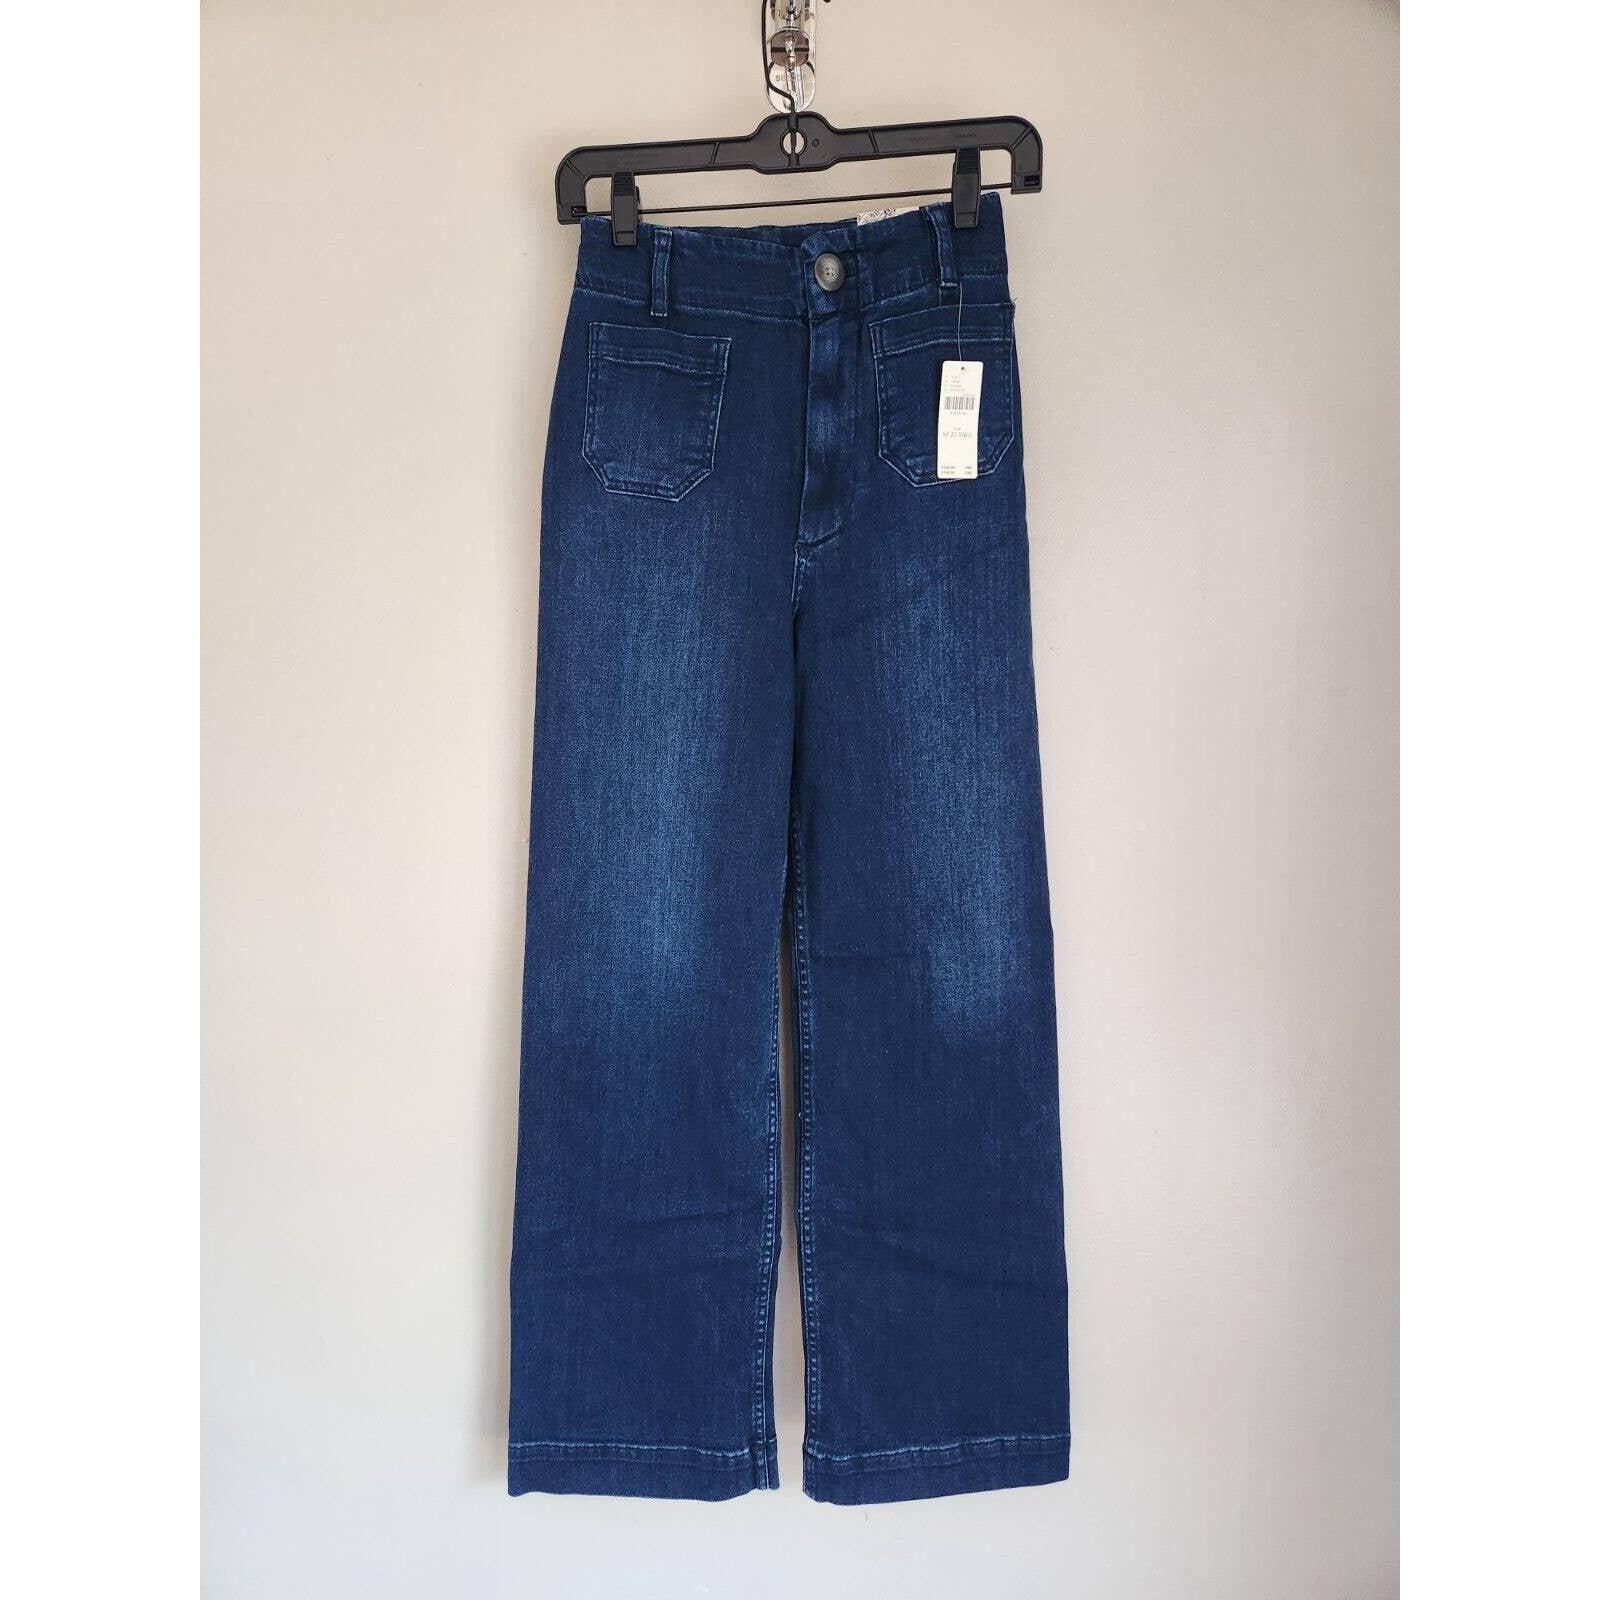 Latest  NWT Anthropologie Pilcro The Skipper Cropped Wide-Leg Jeans Size 25 Tall Denim nHEdlGqo0 Cheap